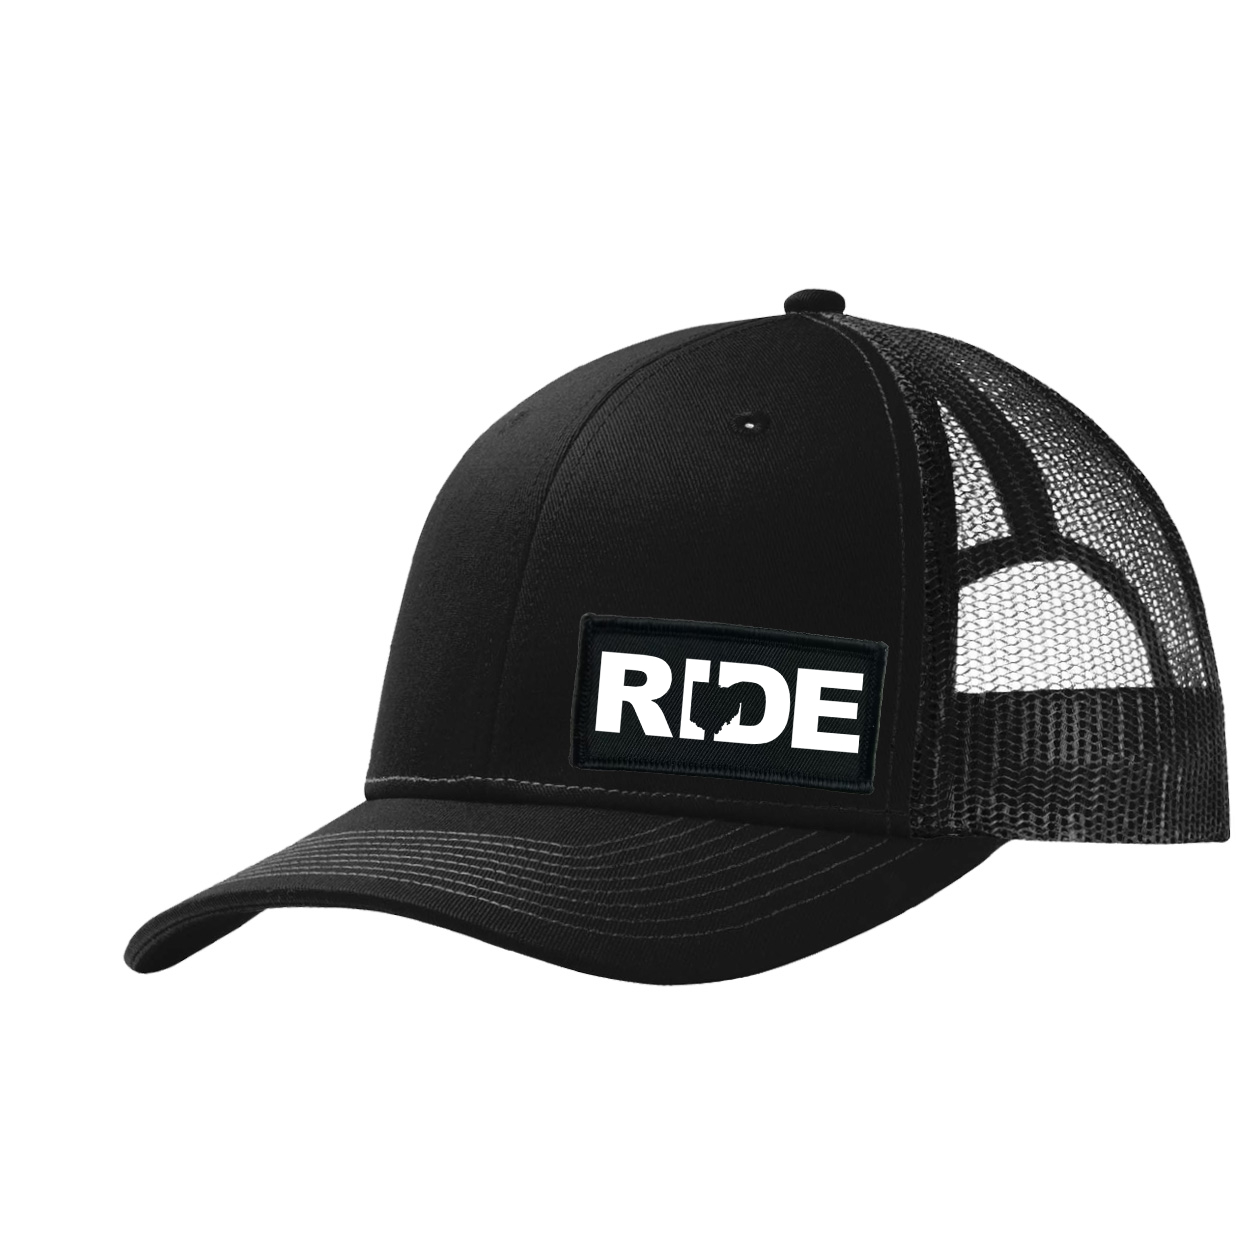 Ride Ohio Night Out Woven Patch Snapback Trucker Hat Black (White Logo)